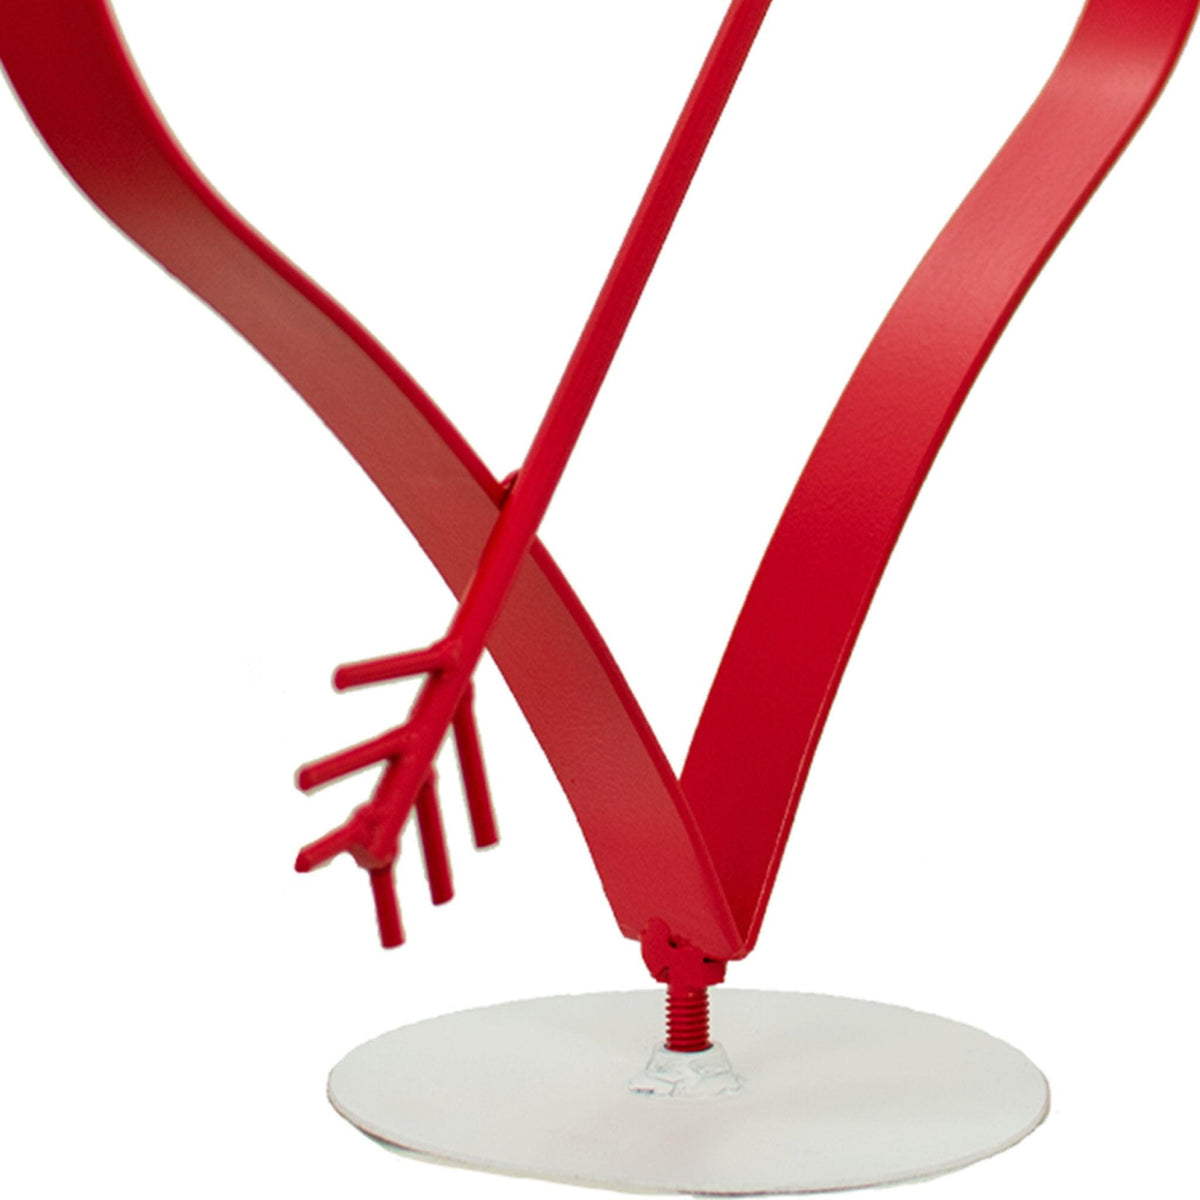 Lee Display's Valentine's Day Heart Centerpiece with Cupid's Arrow and Display Stand.  On sale at leedisplay.com